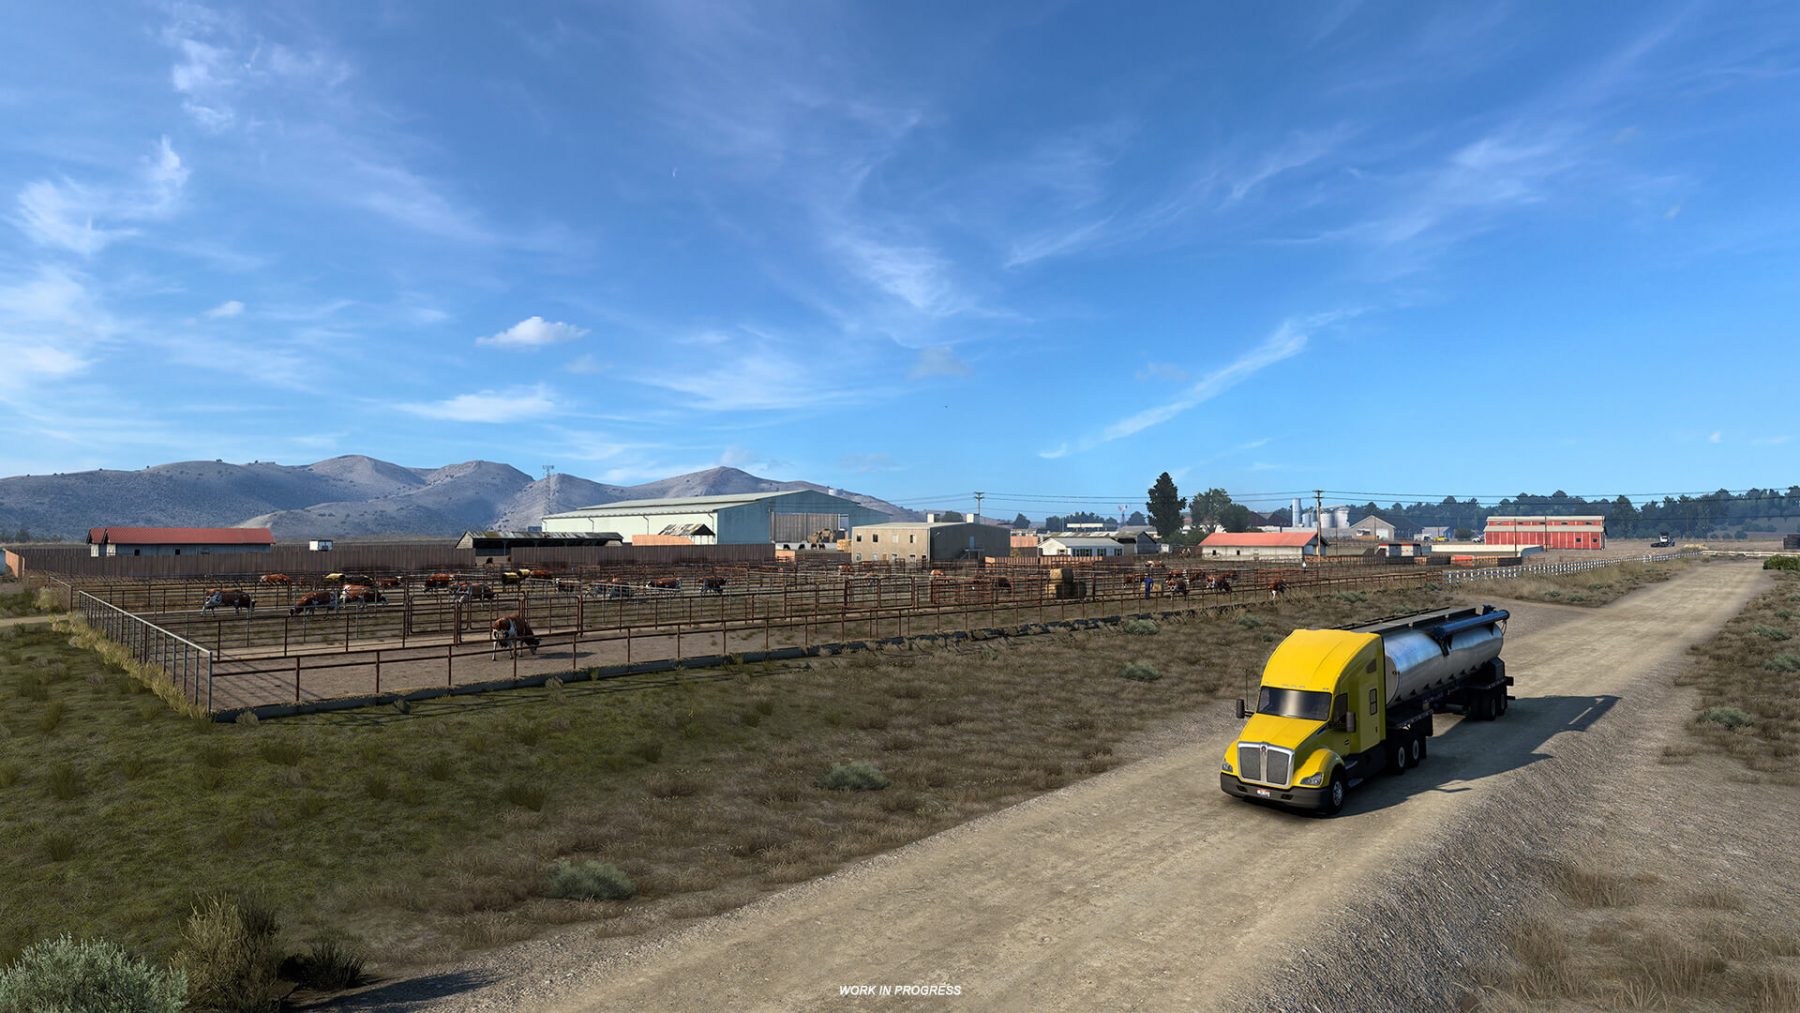 wyoming_farms_agriculture_01